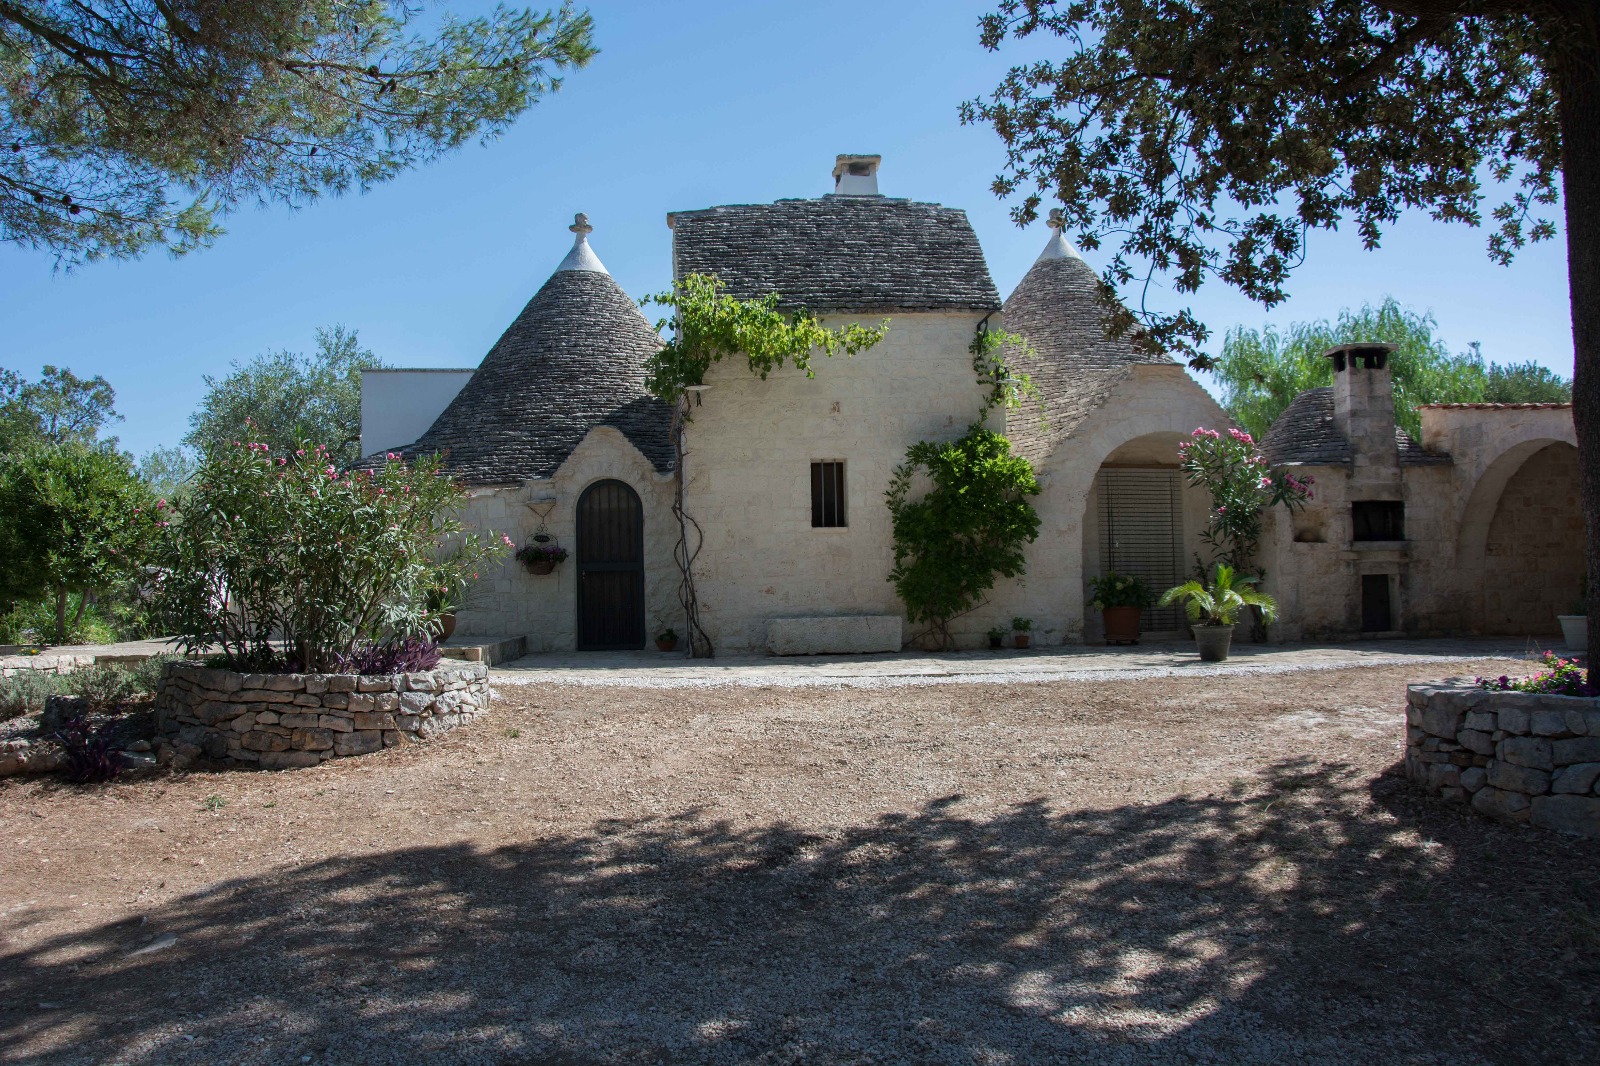 THE PLACE OF FAIRY TALES: THE TURNKEY RENOVATION OF A COMPLEX OF TRULLI IN MARTINA FRANCA